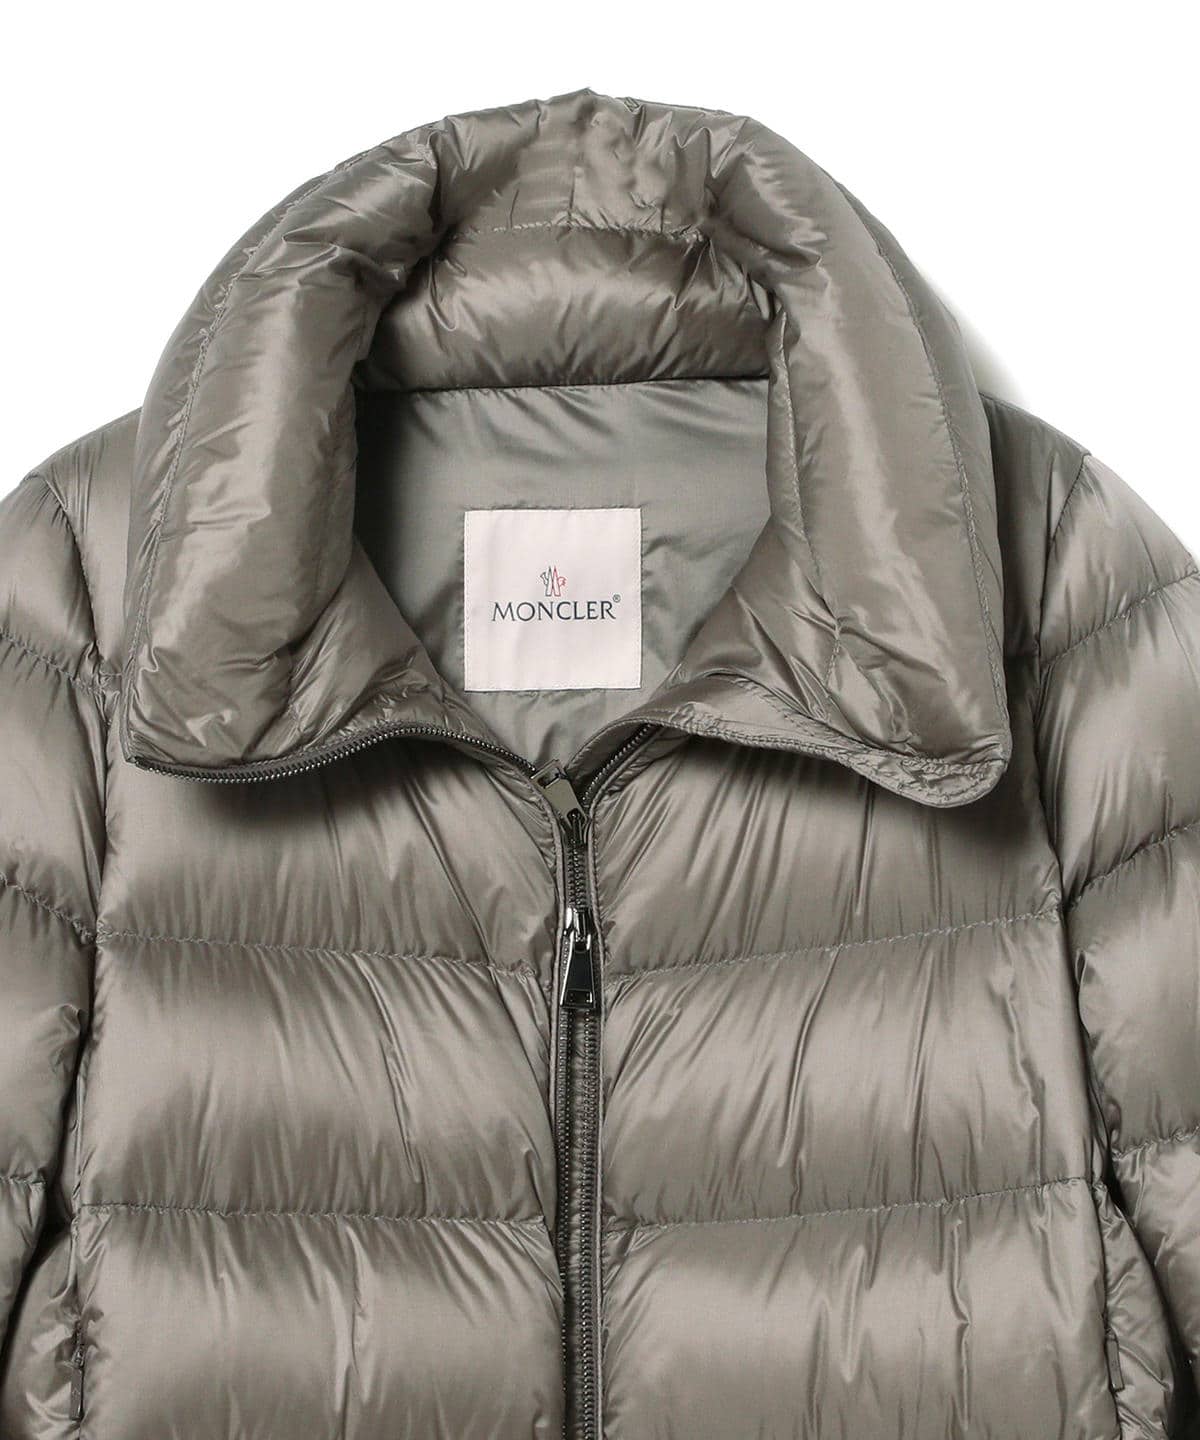 MONCLER / ANGES ダウンジャケット - Demi-Luxe BEAMS